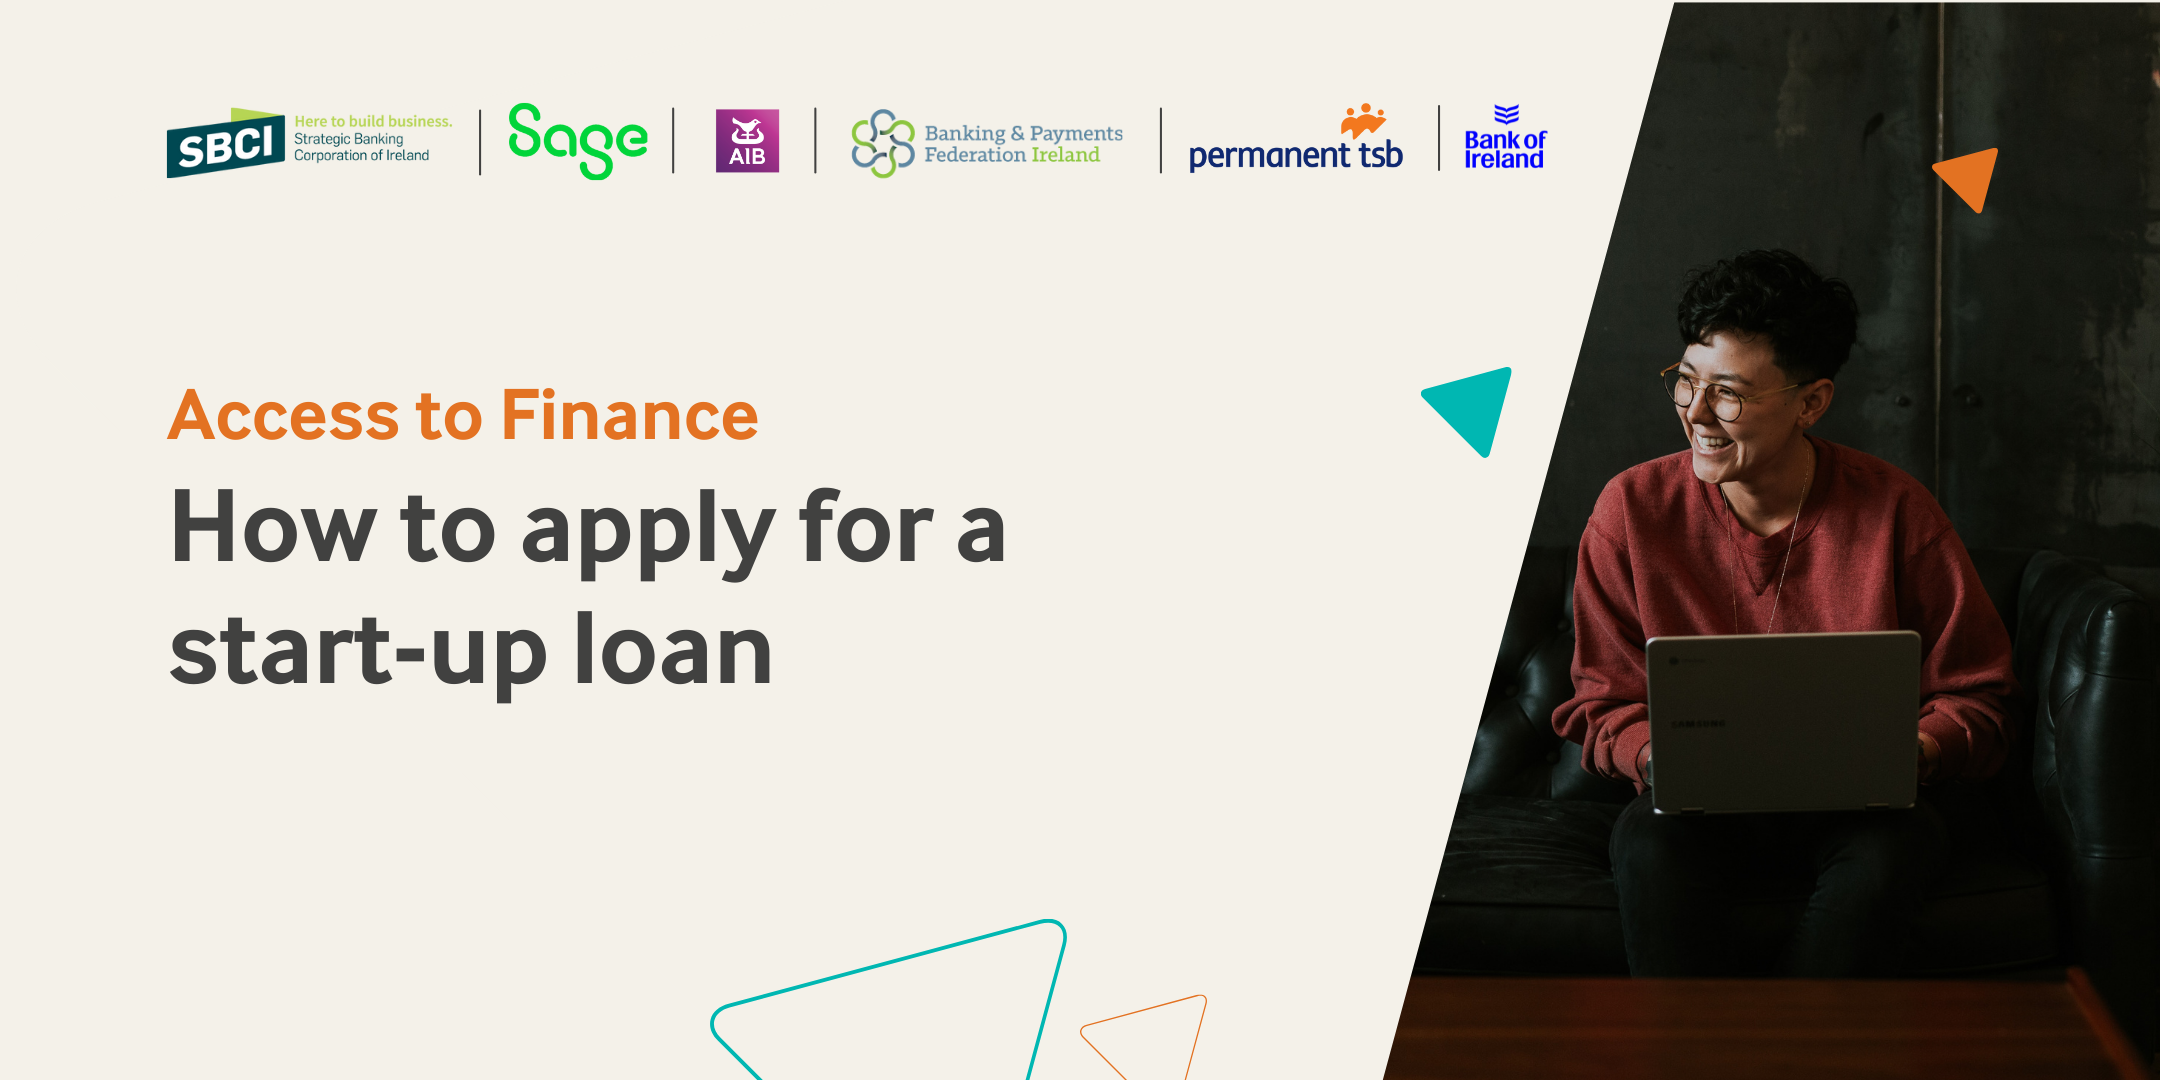 Access to Finance: How to apply for a start-up loan